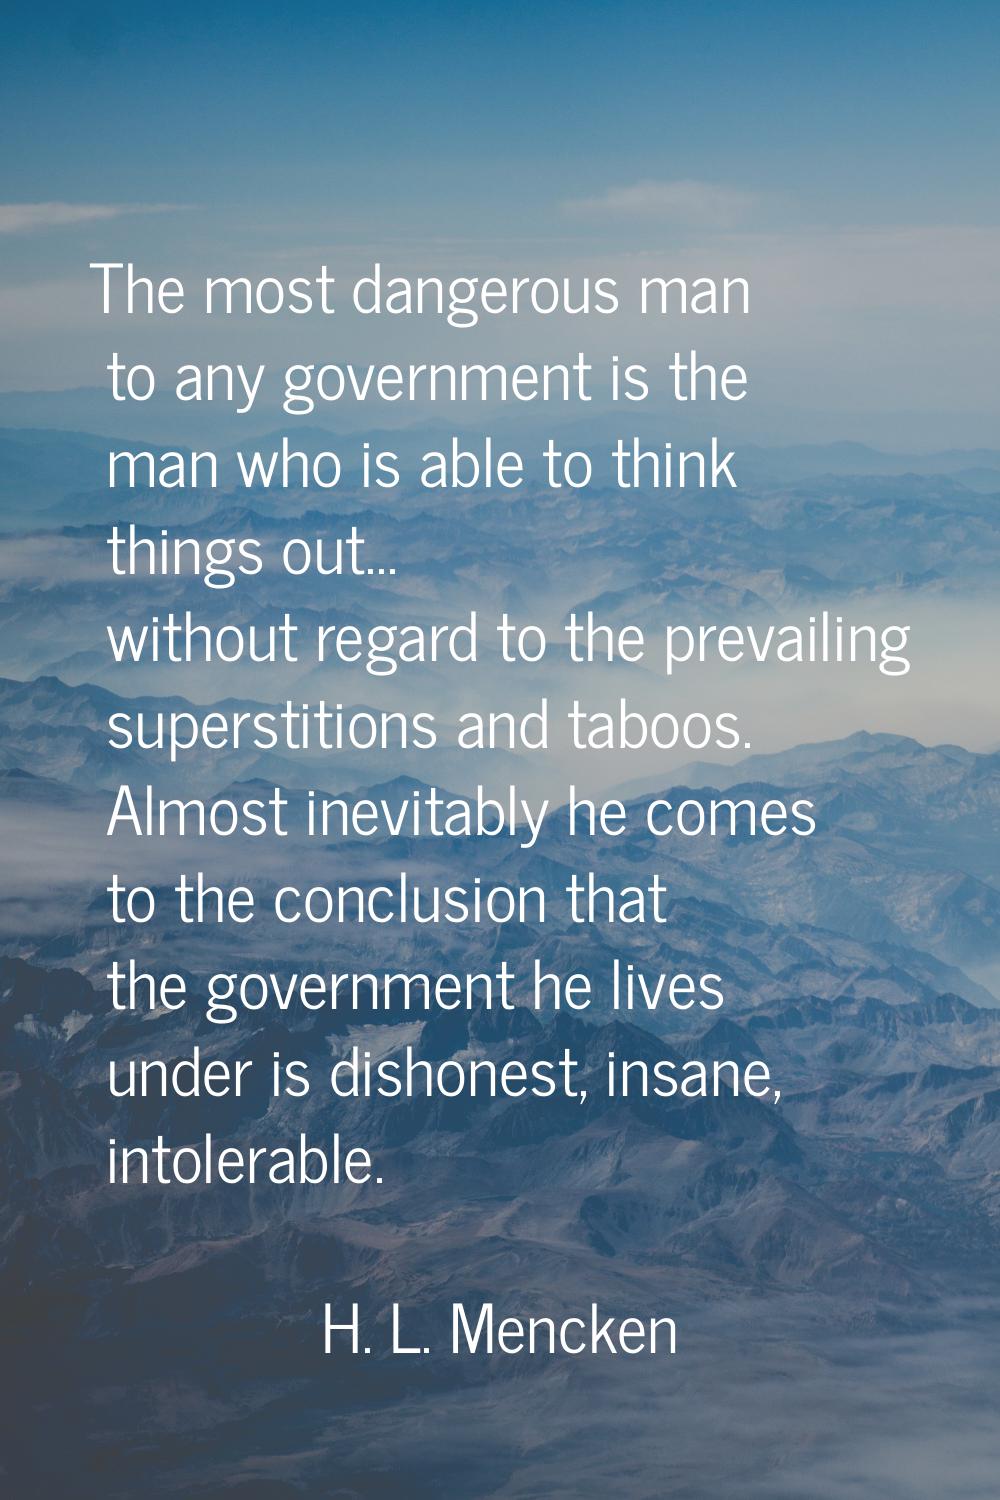 The most dangerous man to any government is the man who is able to think things out... without rega